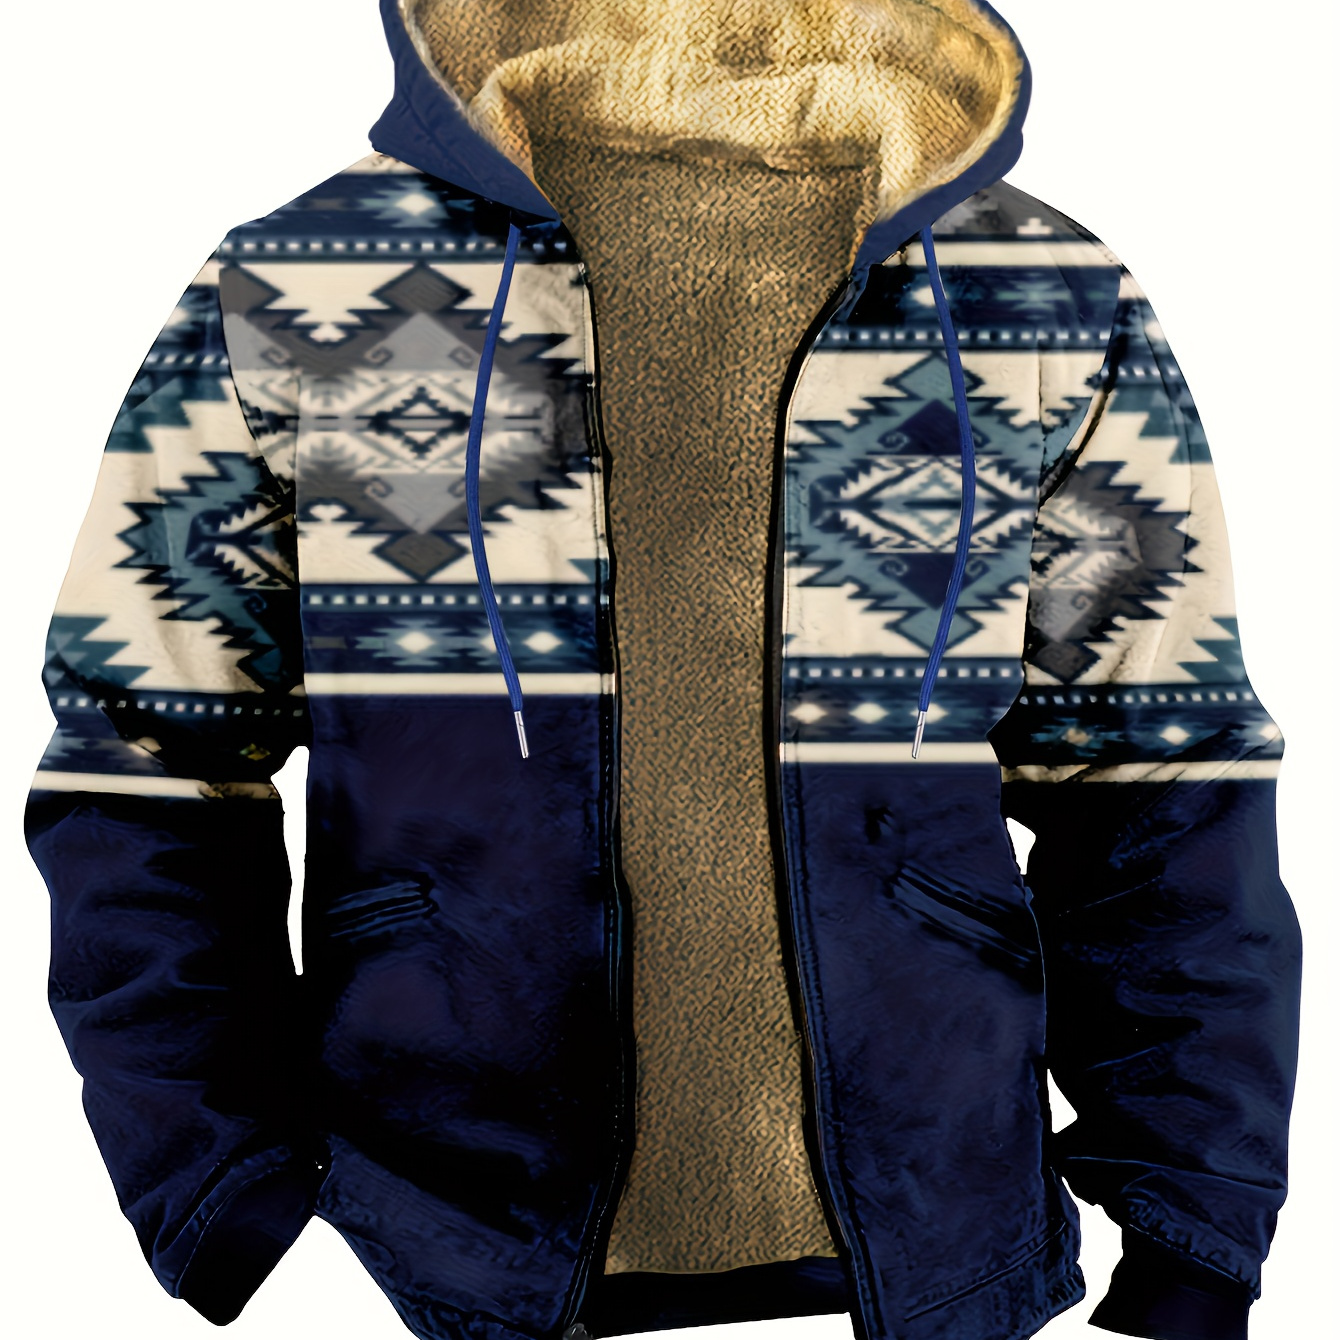 

Ethnic Style Warm Fleece Hooded Jacket, Men's Casual Warm Thick Zip Up Hoodie For Fall Winter